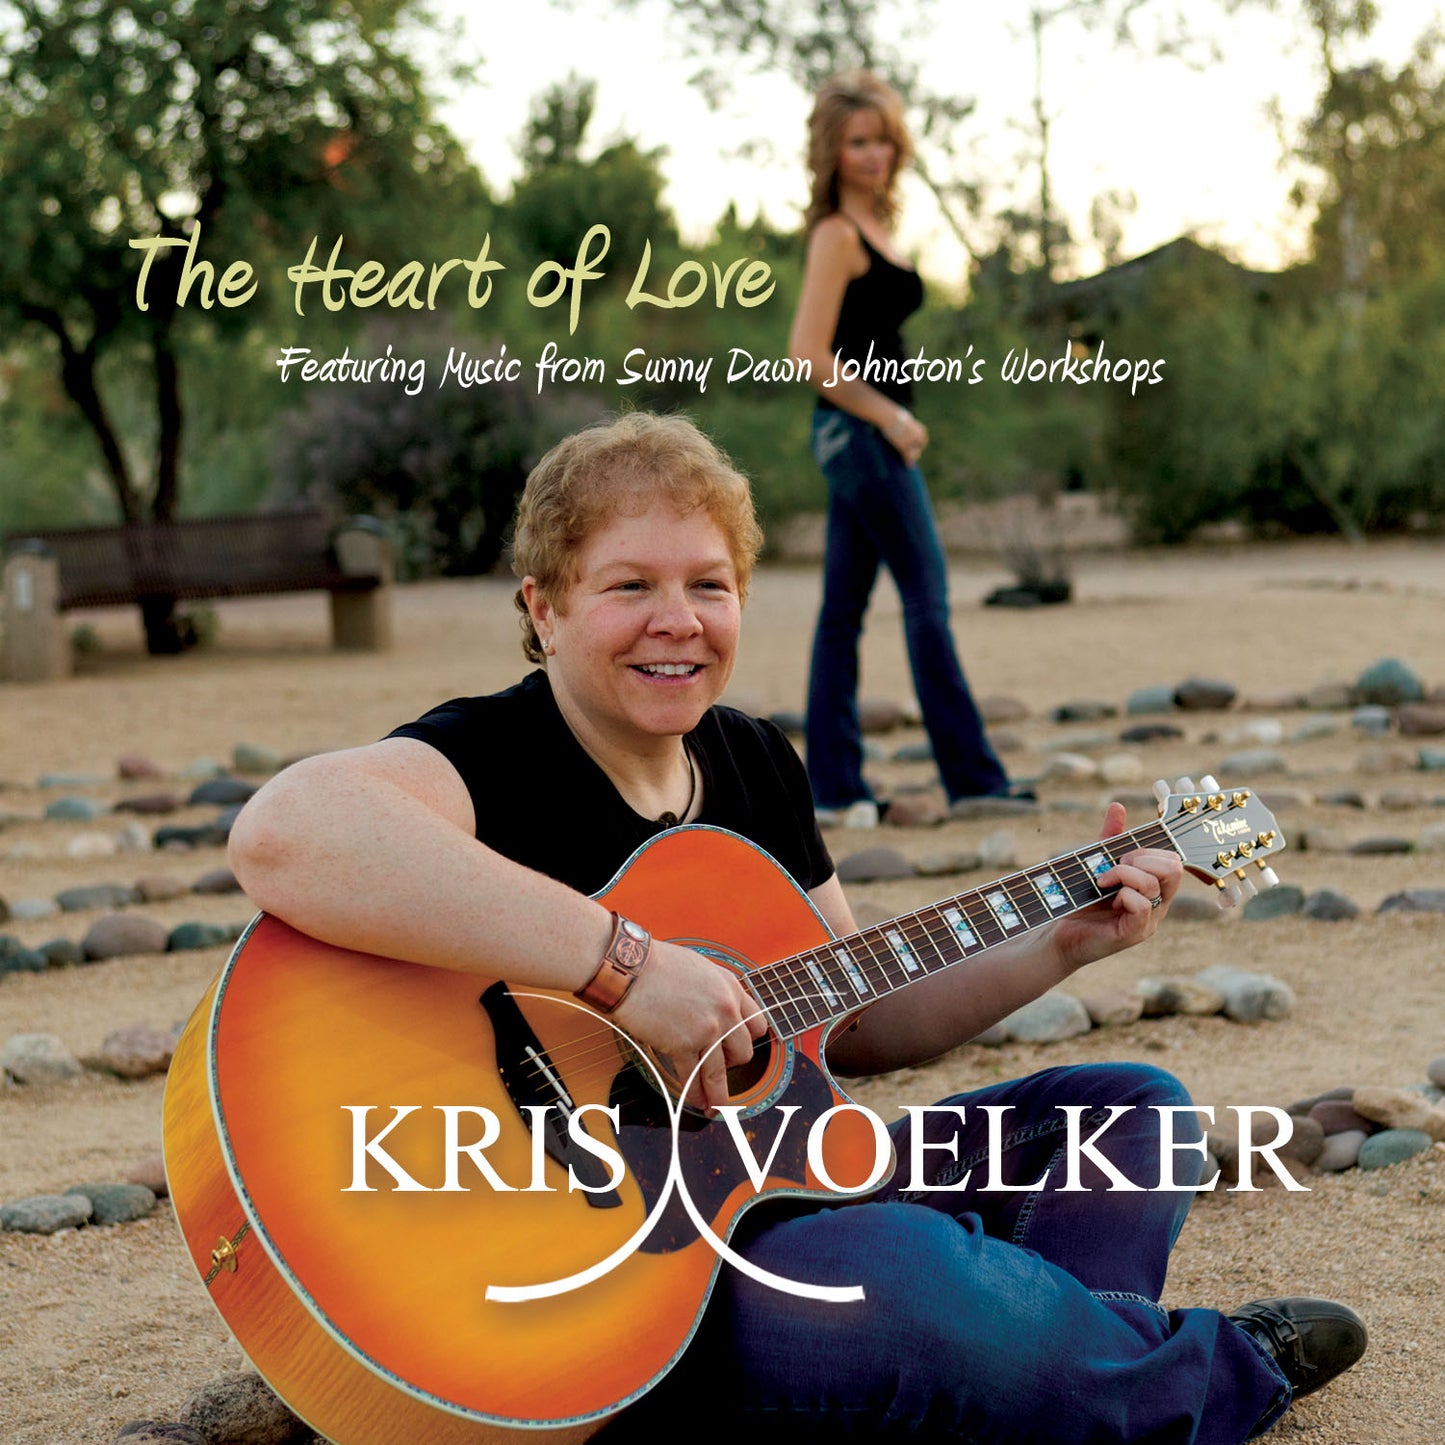 The Heart of Love by Kris Voelker MP3 Download